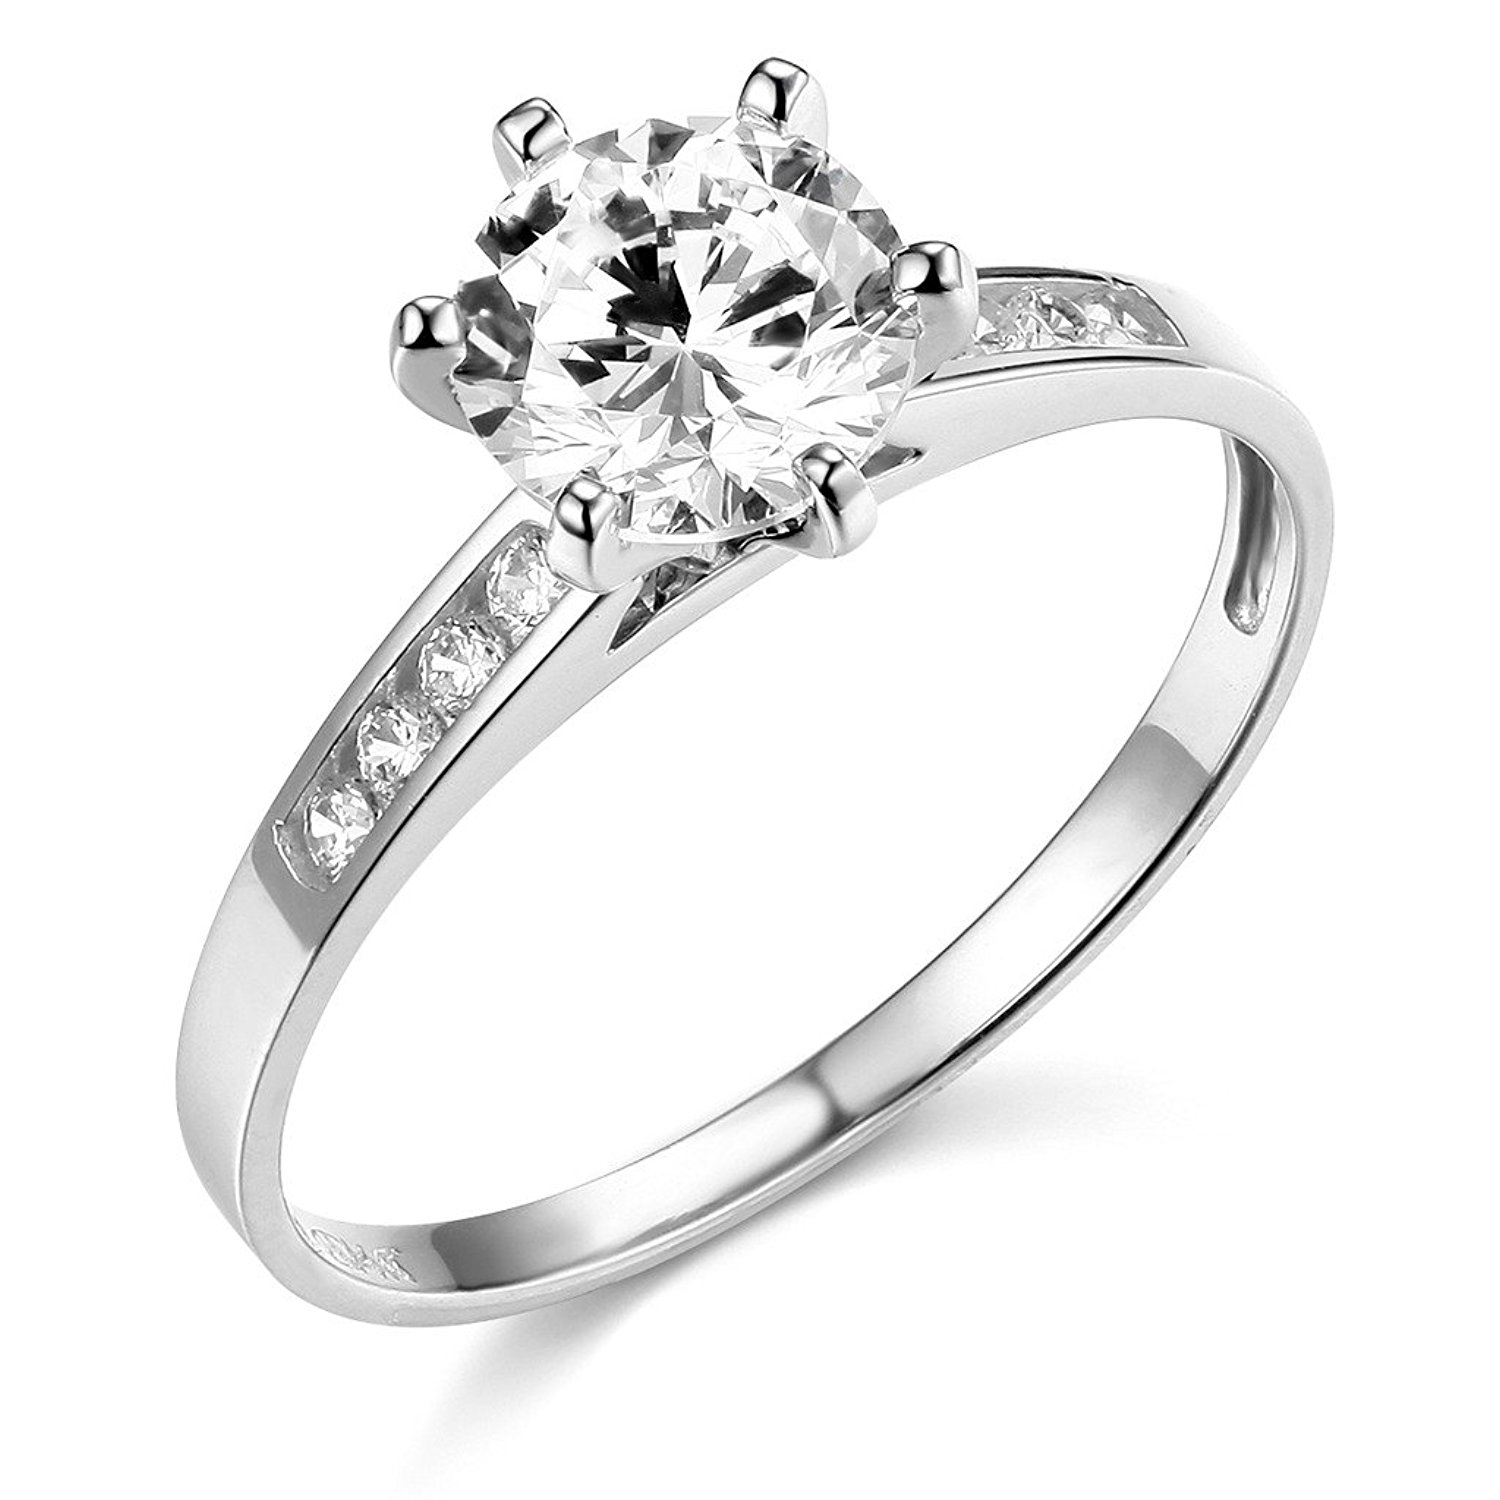 14k Yellow OR White Gold SOLID Wedding Engagement Ring | Amazon.com